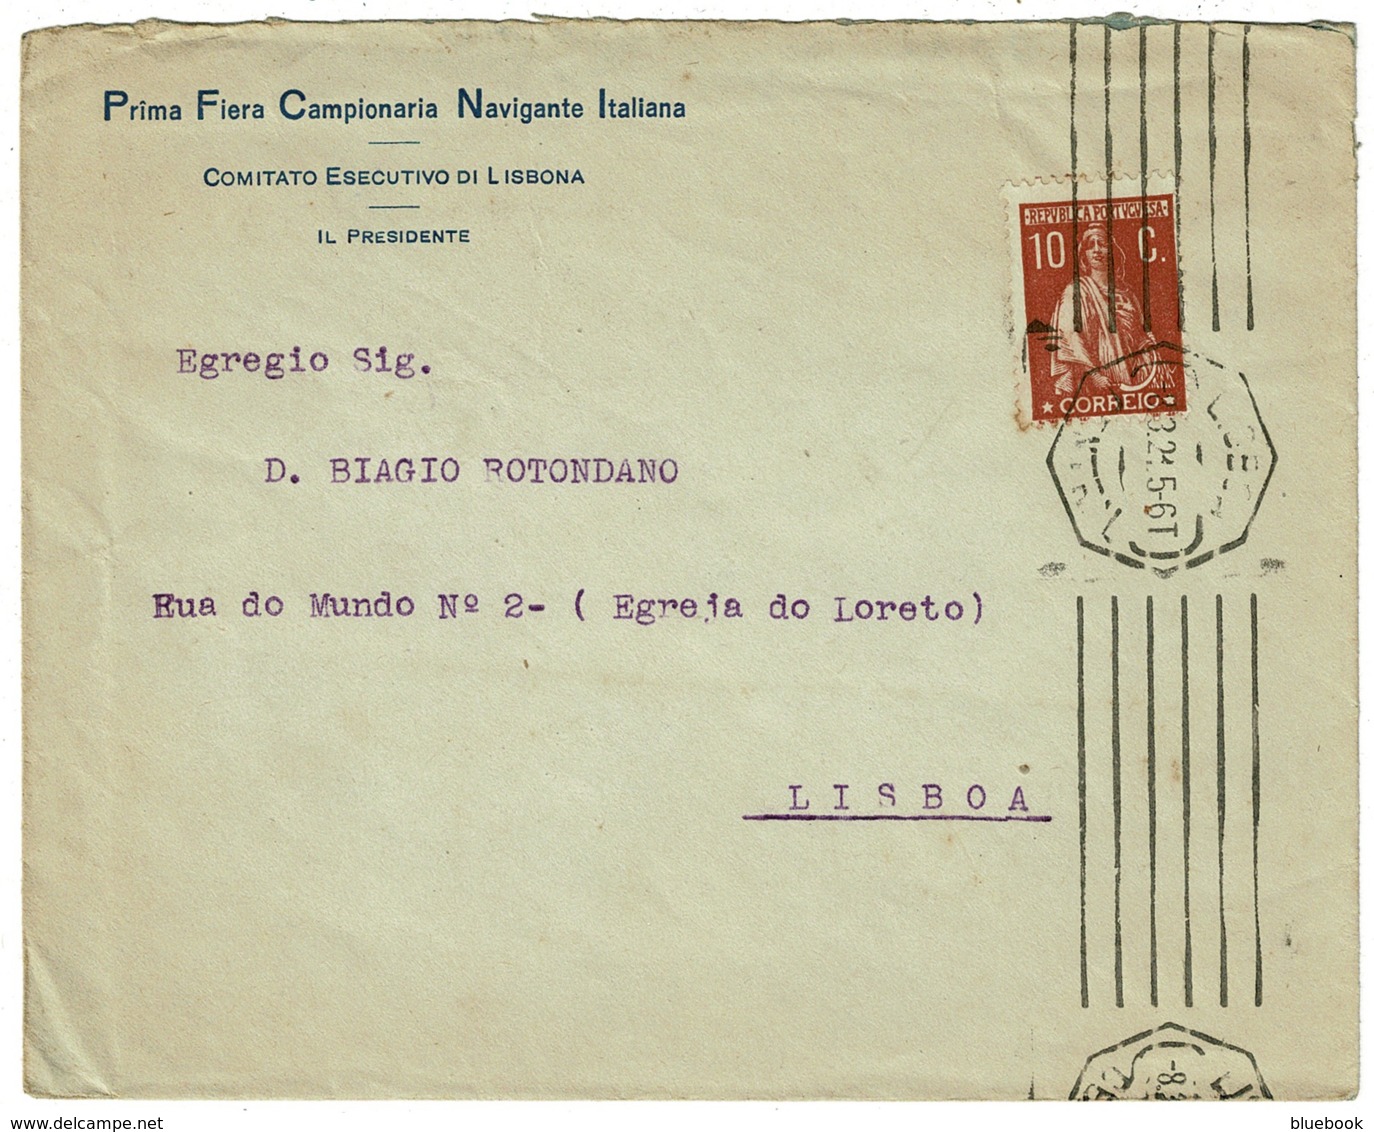 Ref 1300 - 1921 Portugal Cover 10c Ceres Local Rate - P.F.C. Navigante Italiana Italy - Covers & Documents